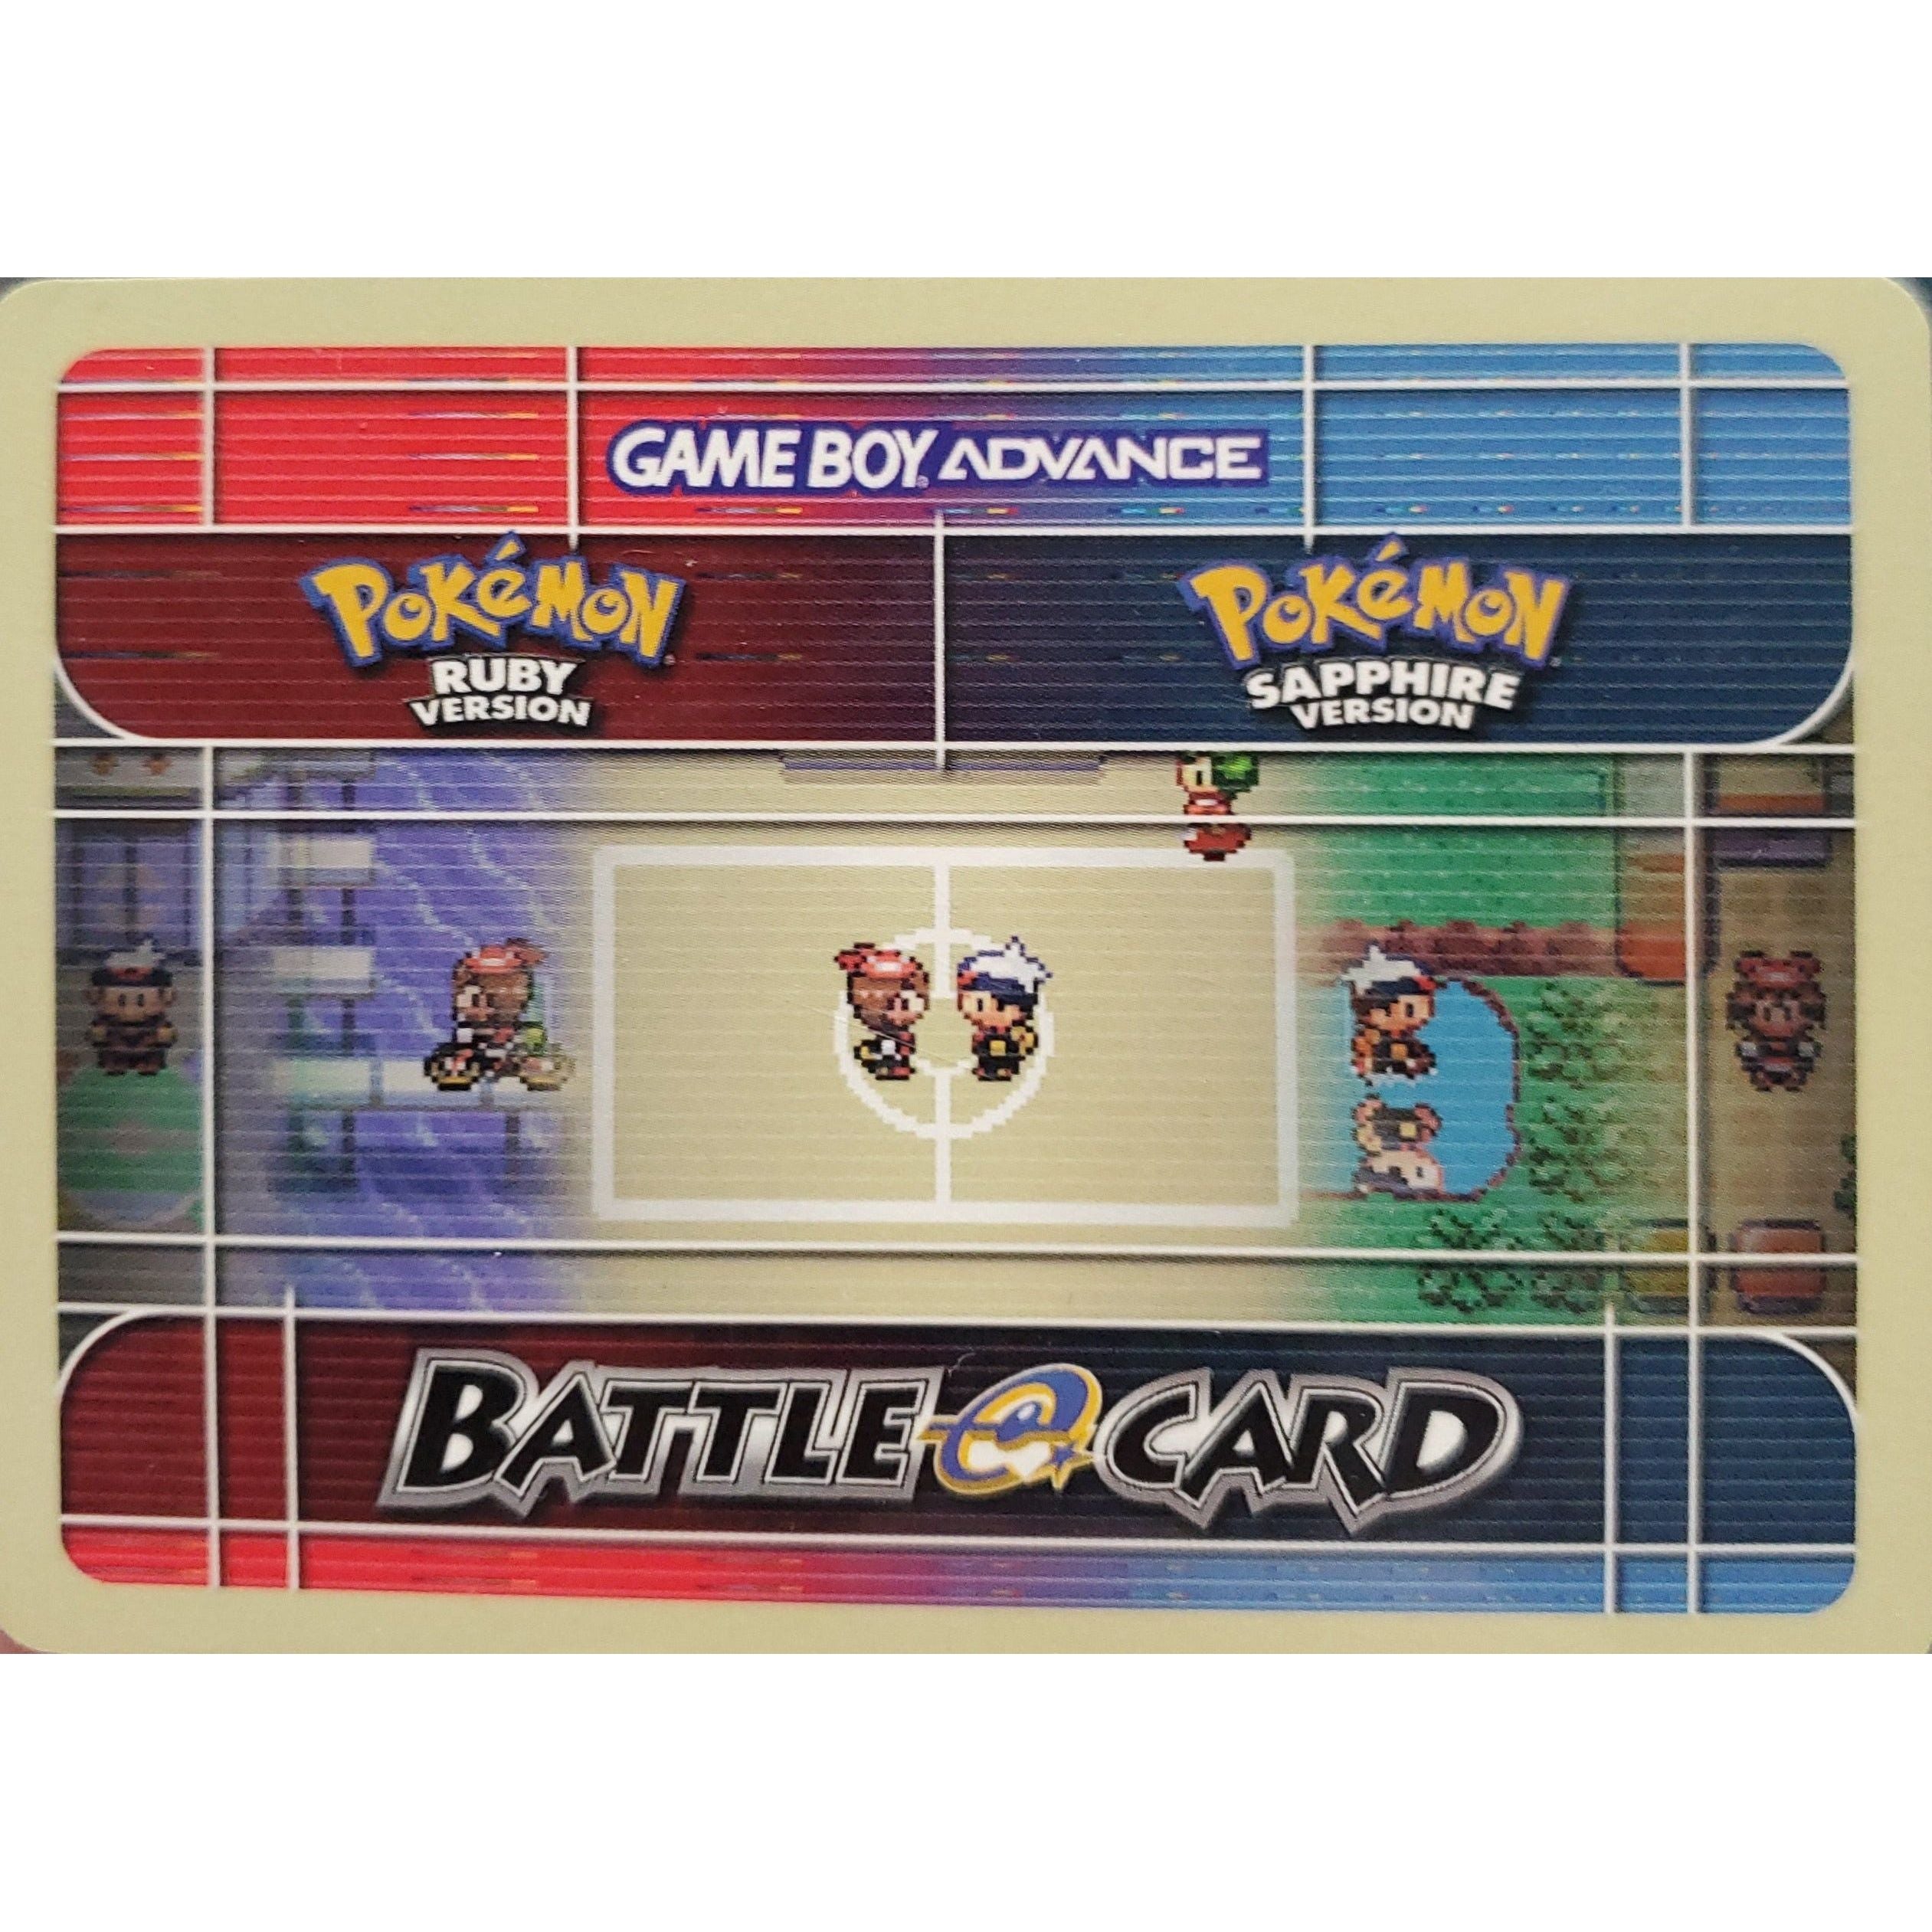 GBA - Pokemon Battle Card - Youngster Rudy